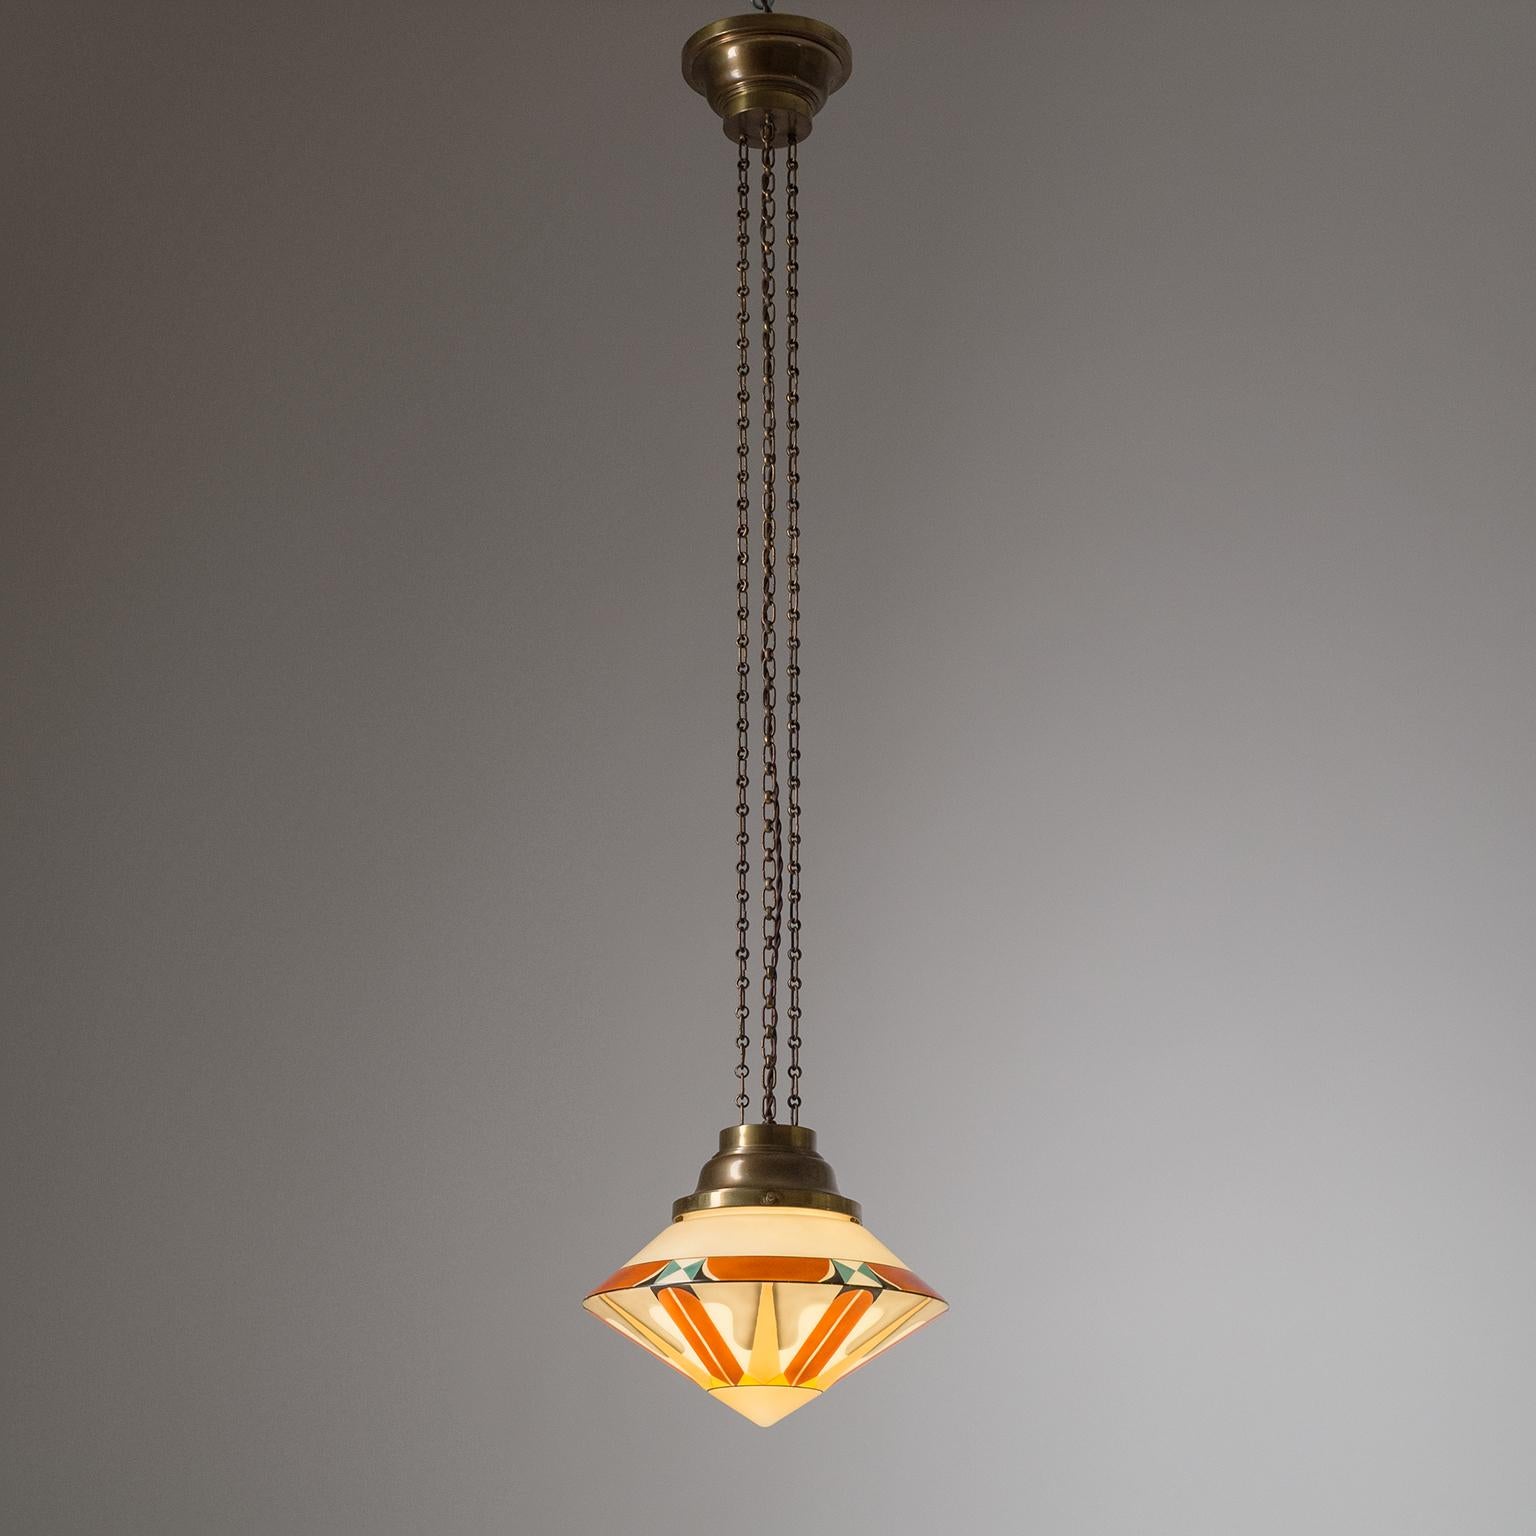 Early 20th Century Rare Art Deco Suspension Light, 1920s, Enameled Glass